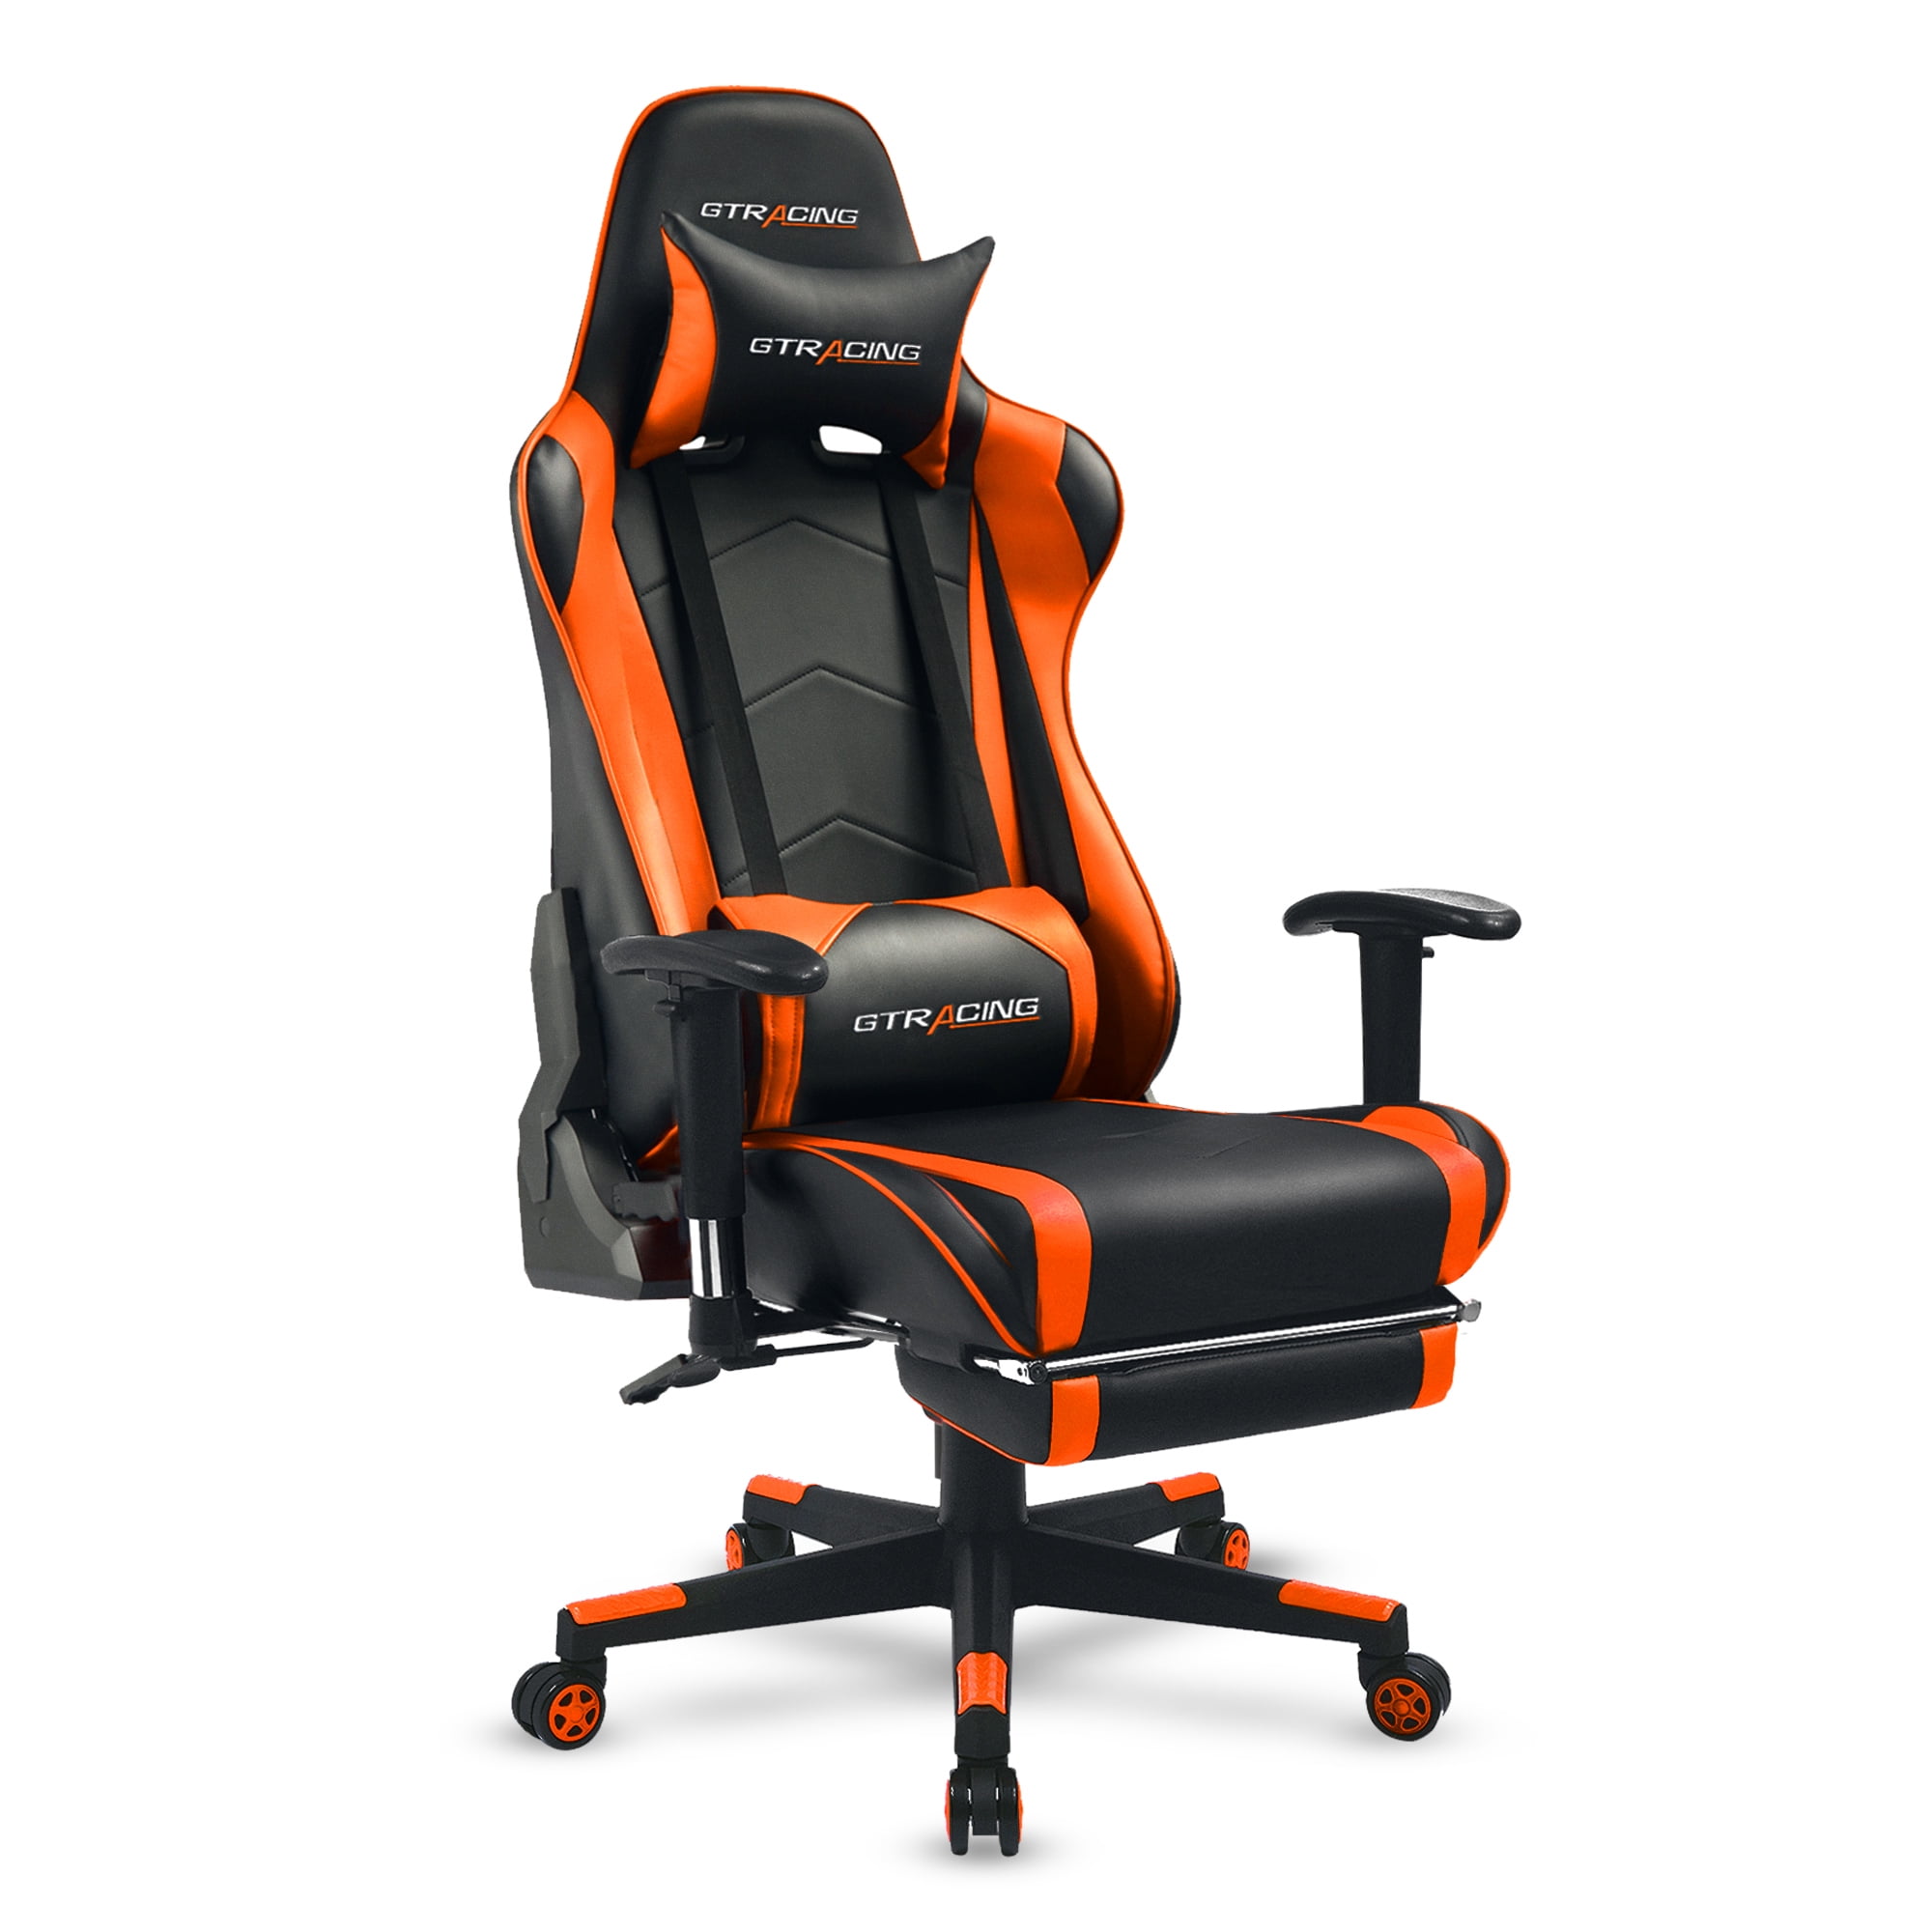 GTRACING Gaming Chair Office Chair PU Leather with Footrest